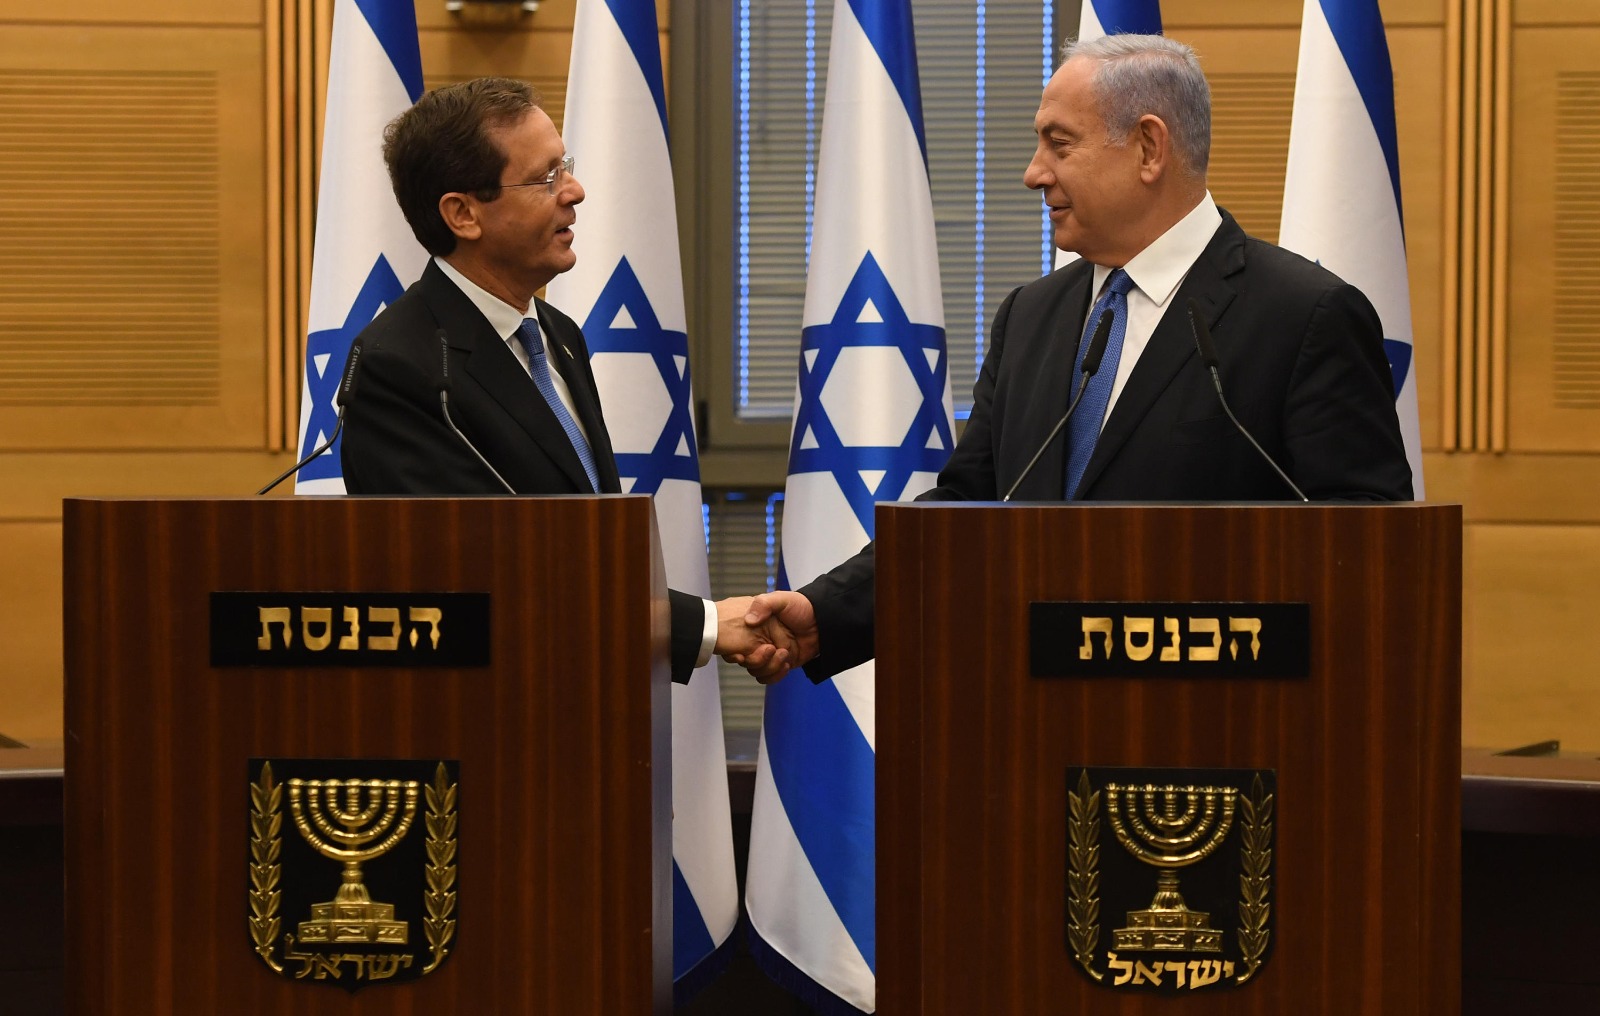 Prime Minister of Israel on Twitter: "Prime Minister Benjamin Netanyahu: "I want to congratulate Isaac Herzog upon being elected to the esteemed position of President of the State of Israel. I told